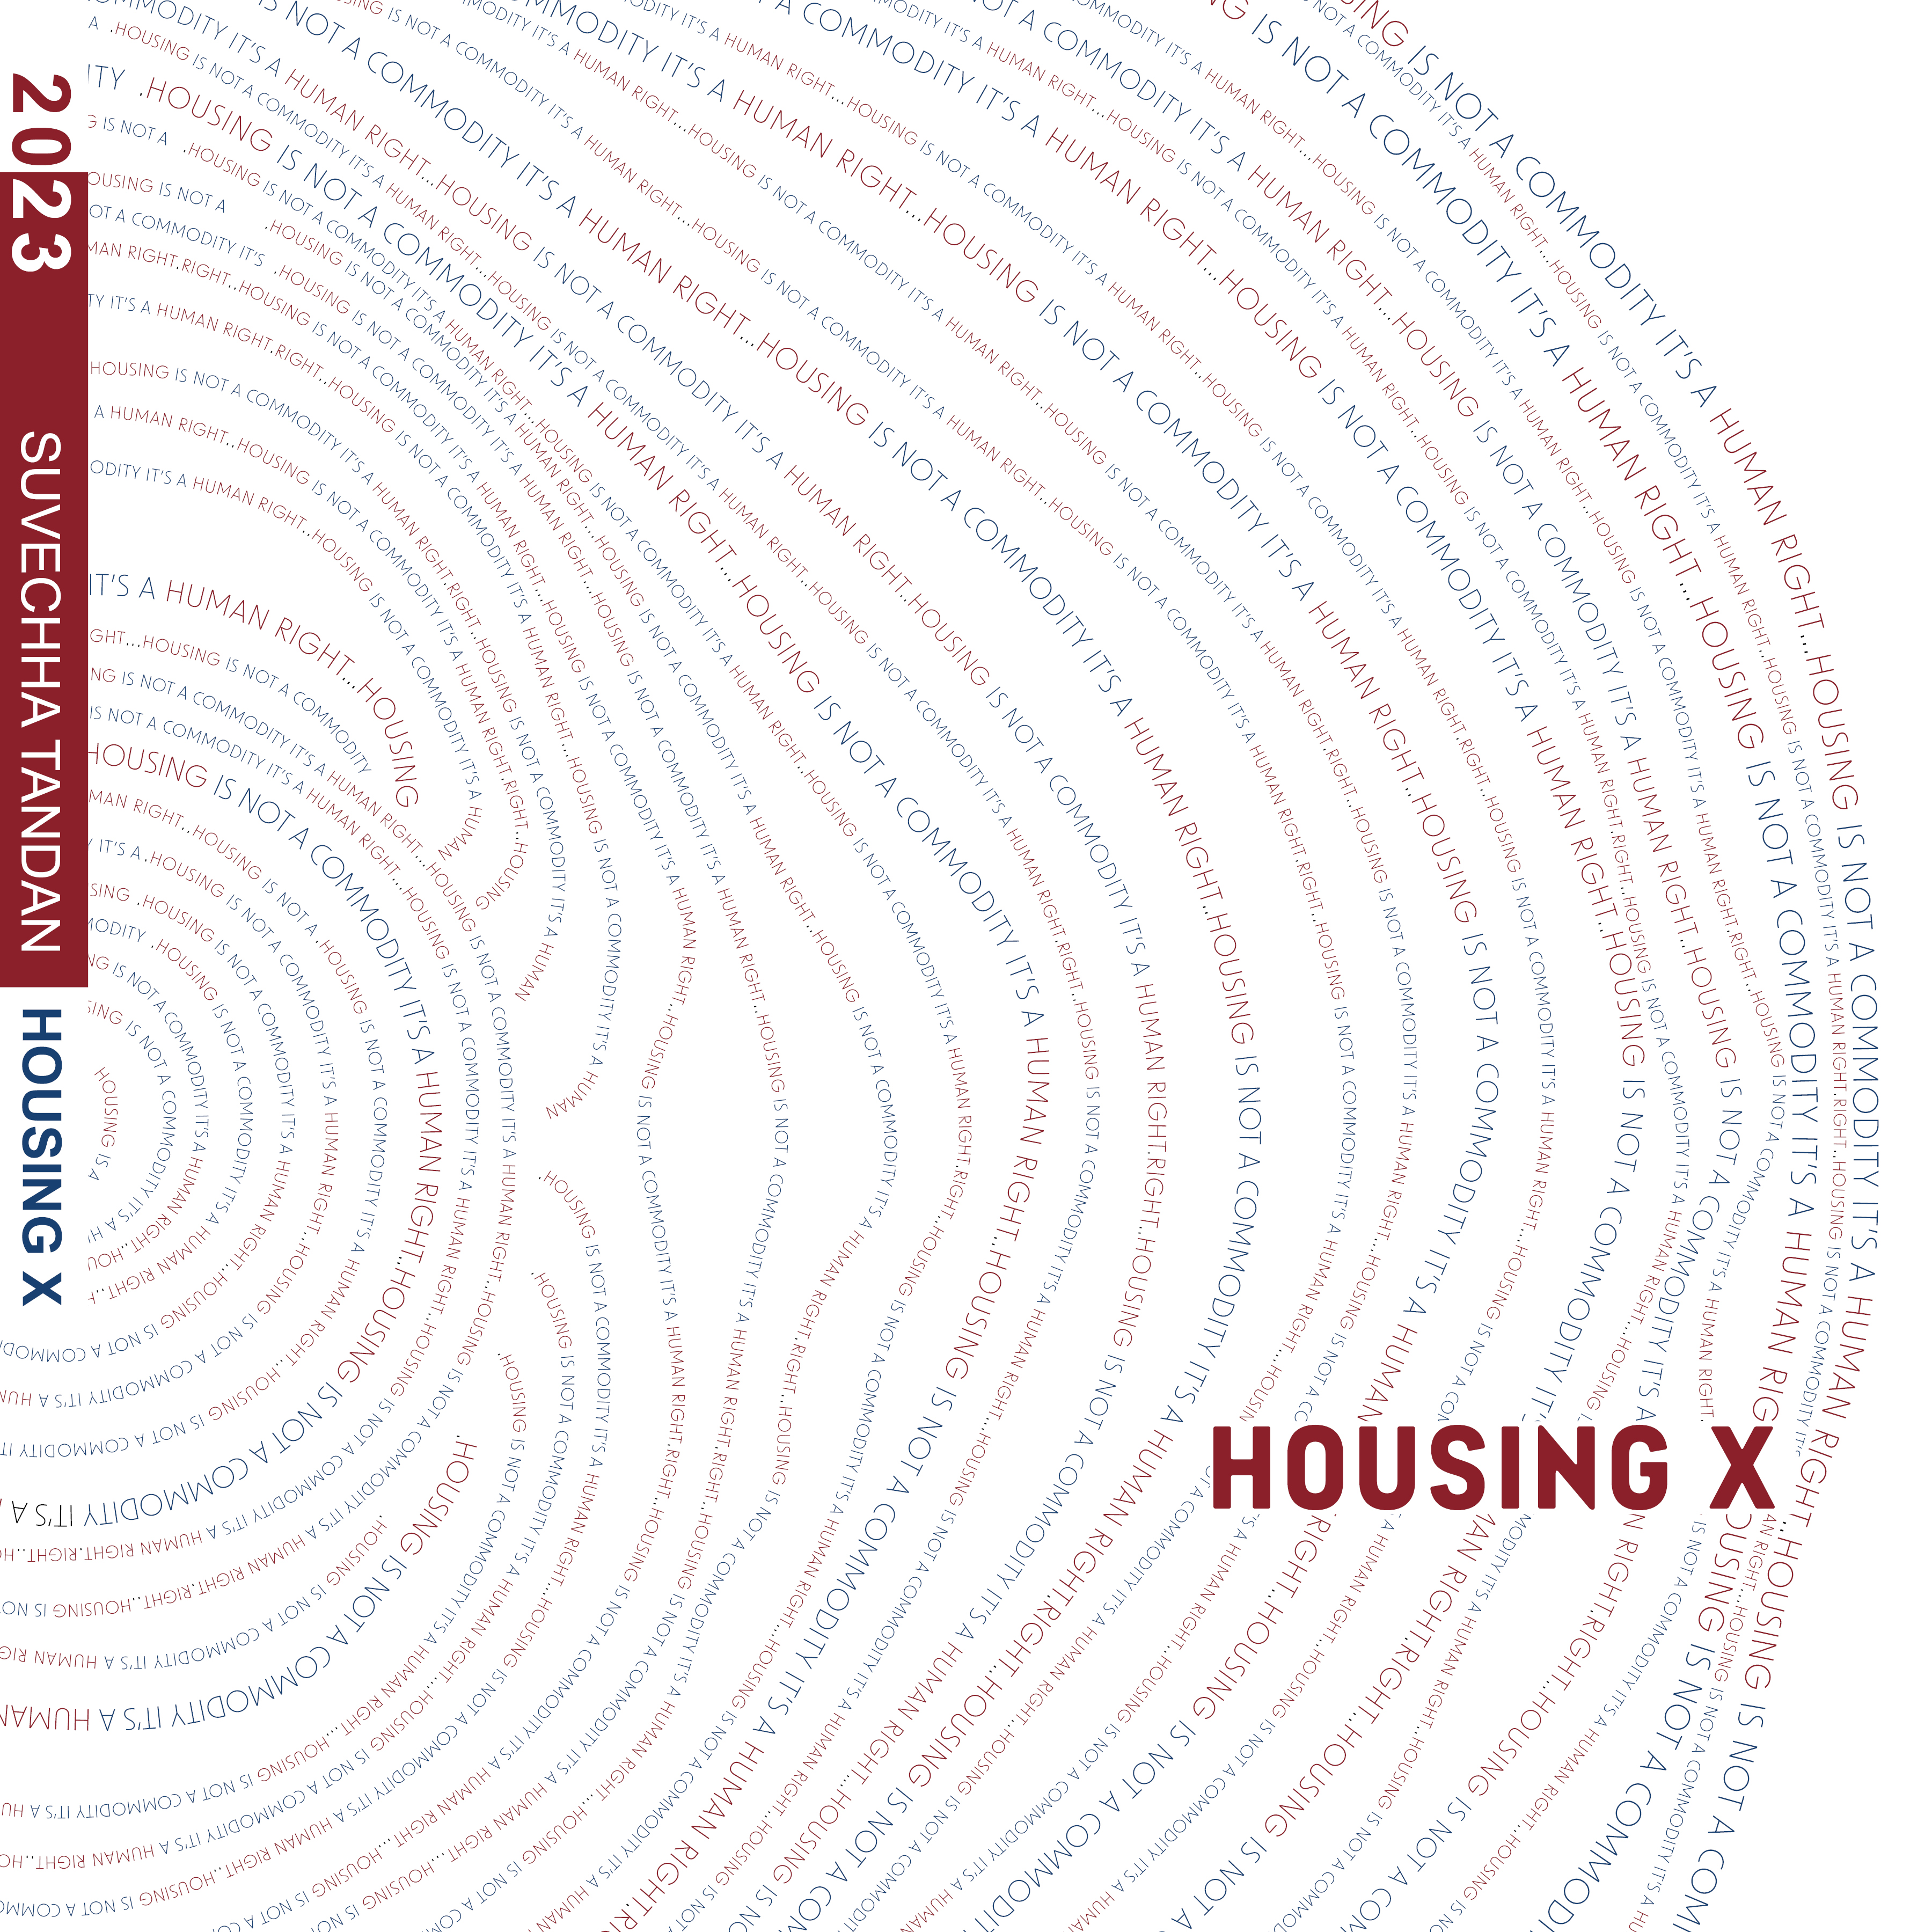 Housing X: Rethinking housing in Dallas   (click for a larger preview)